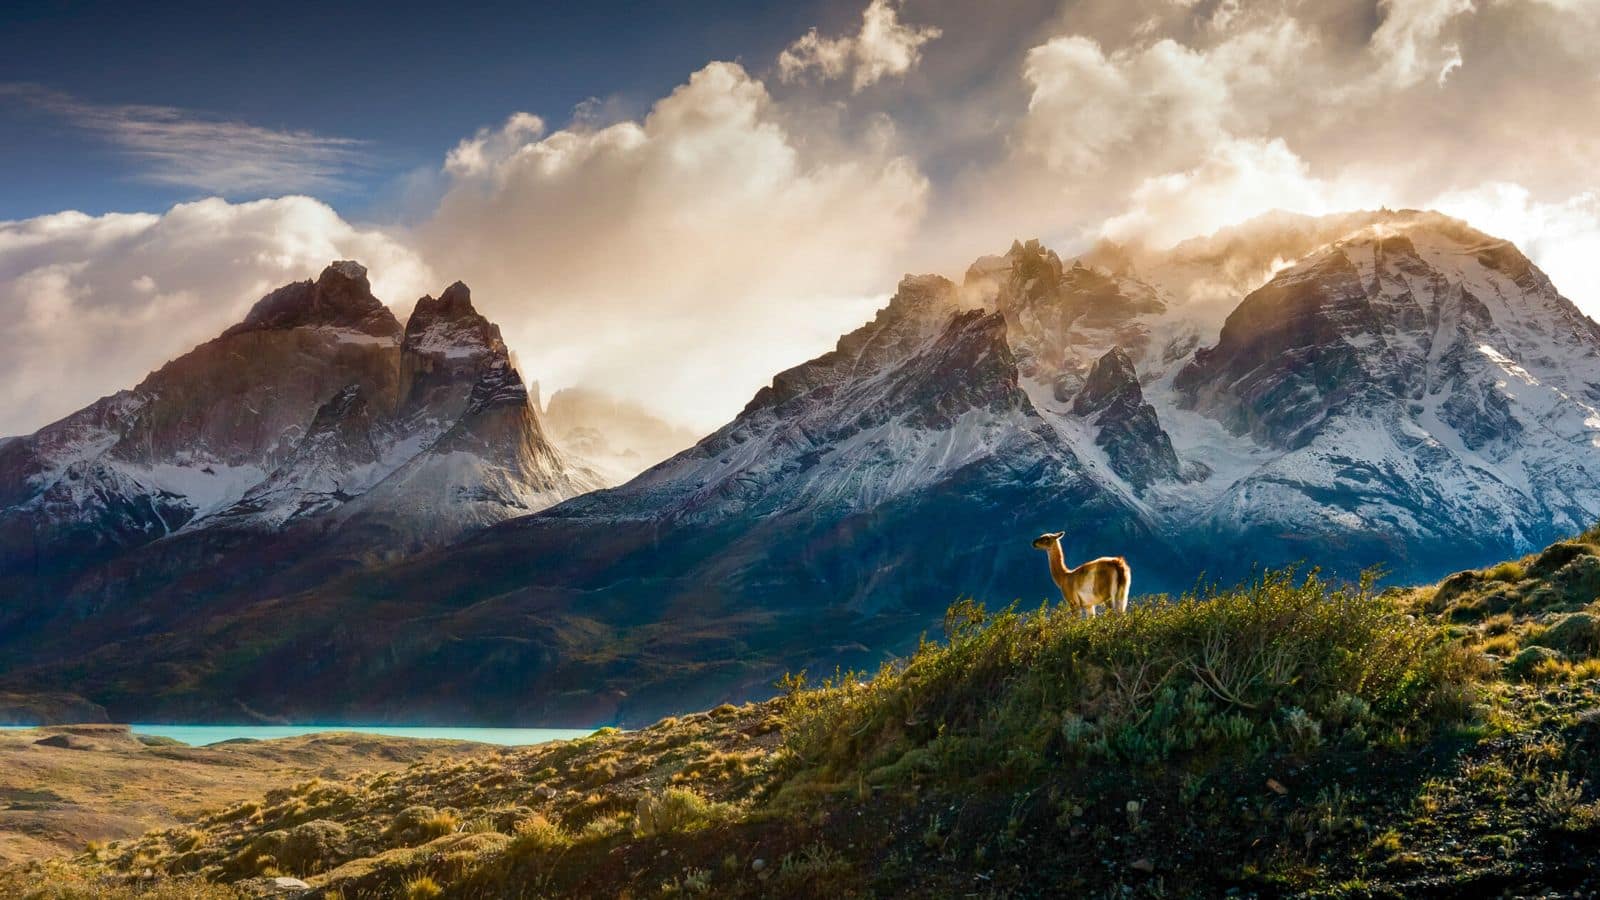 Add Patagonia's off-peak wildlife wonders to your itinerary